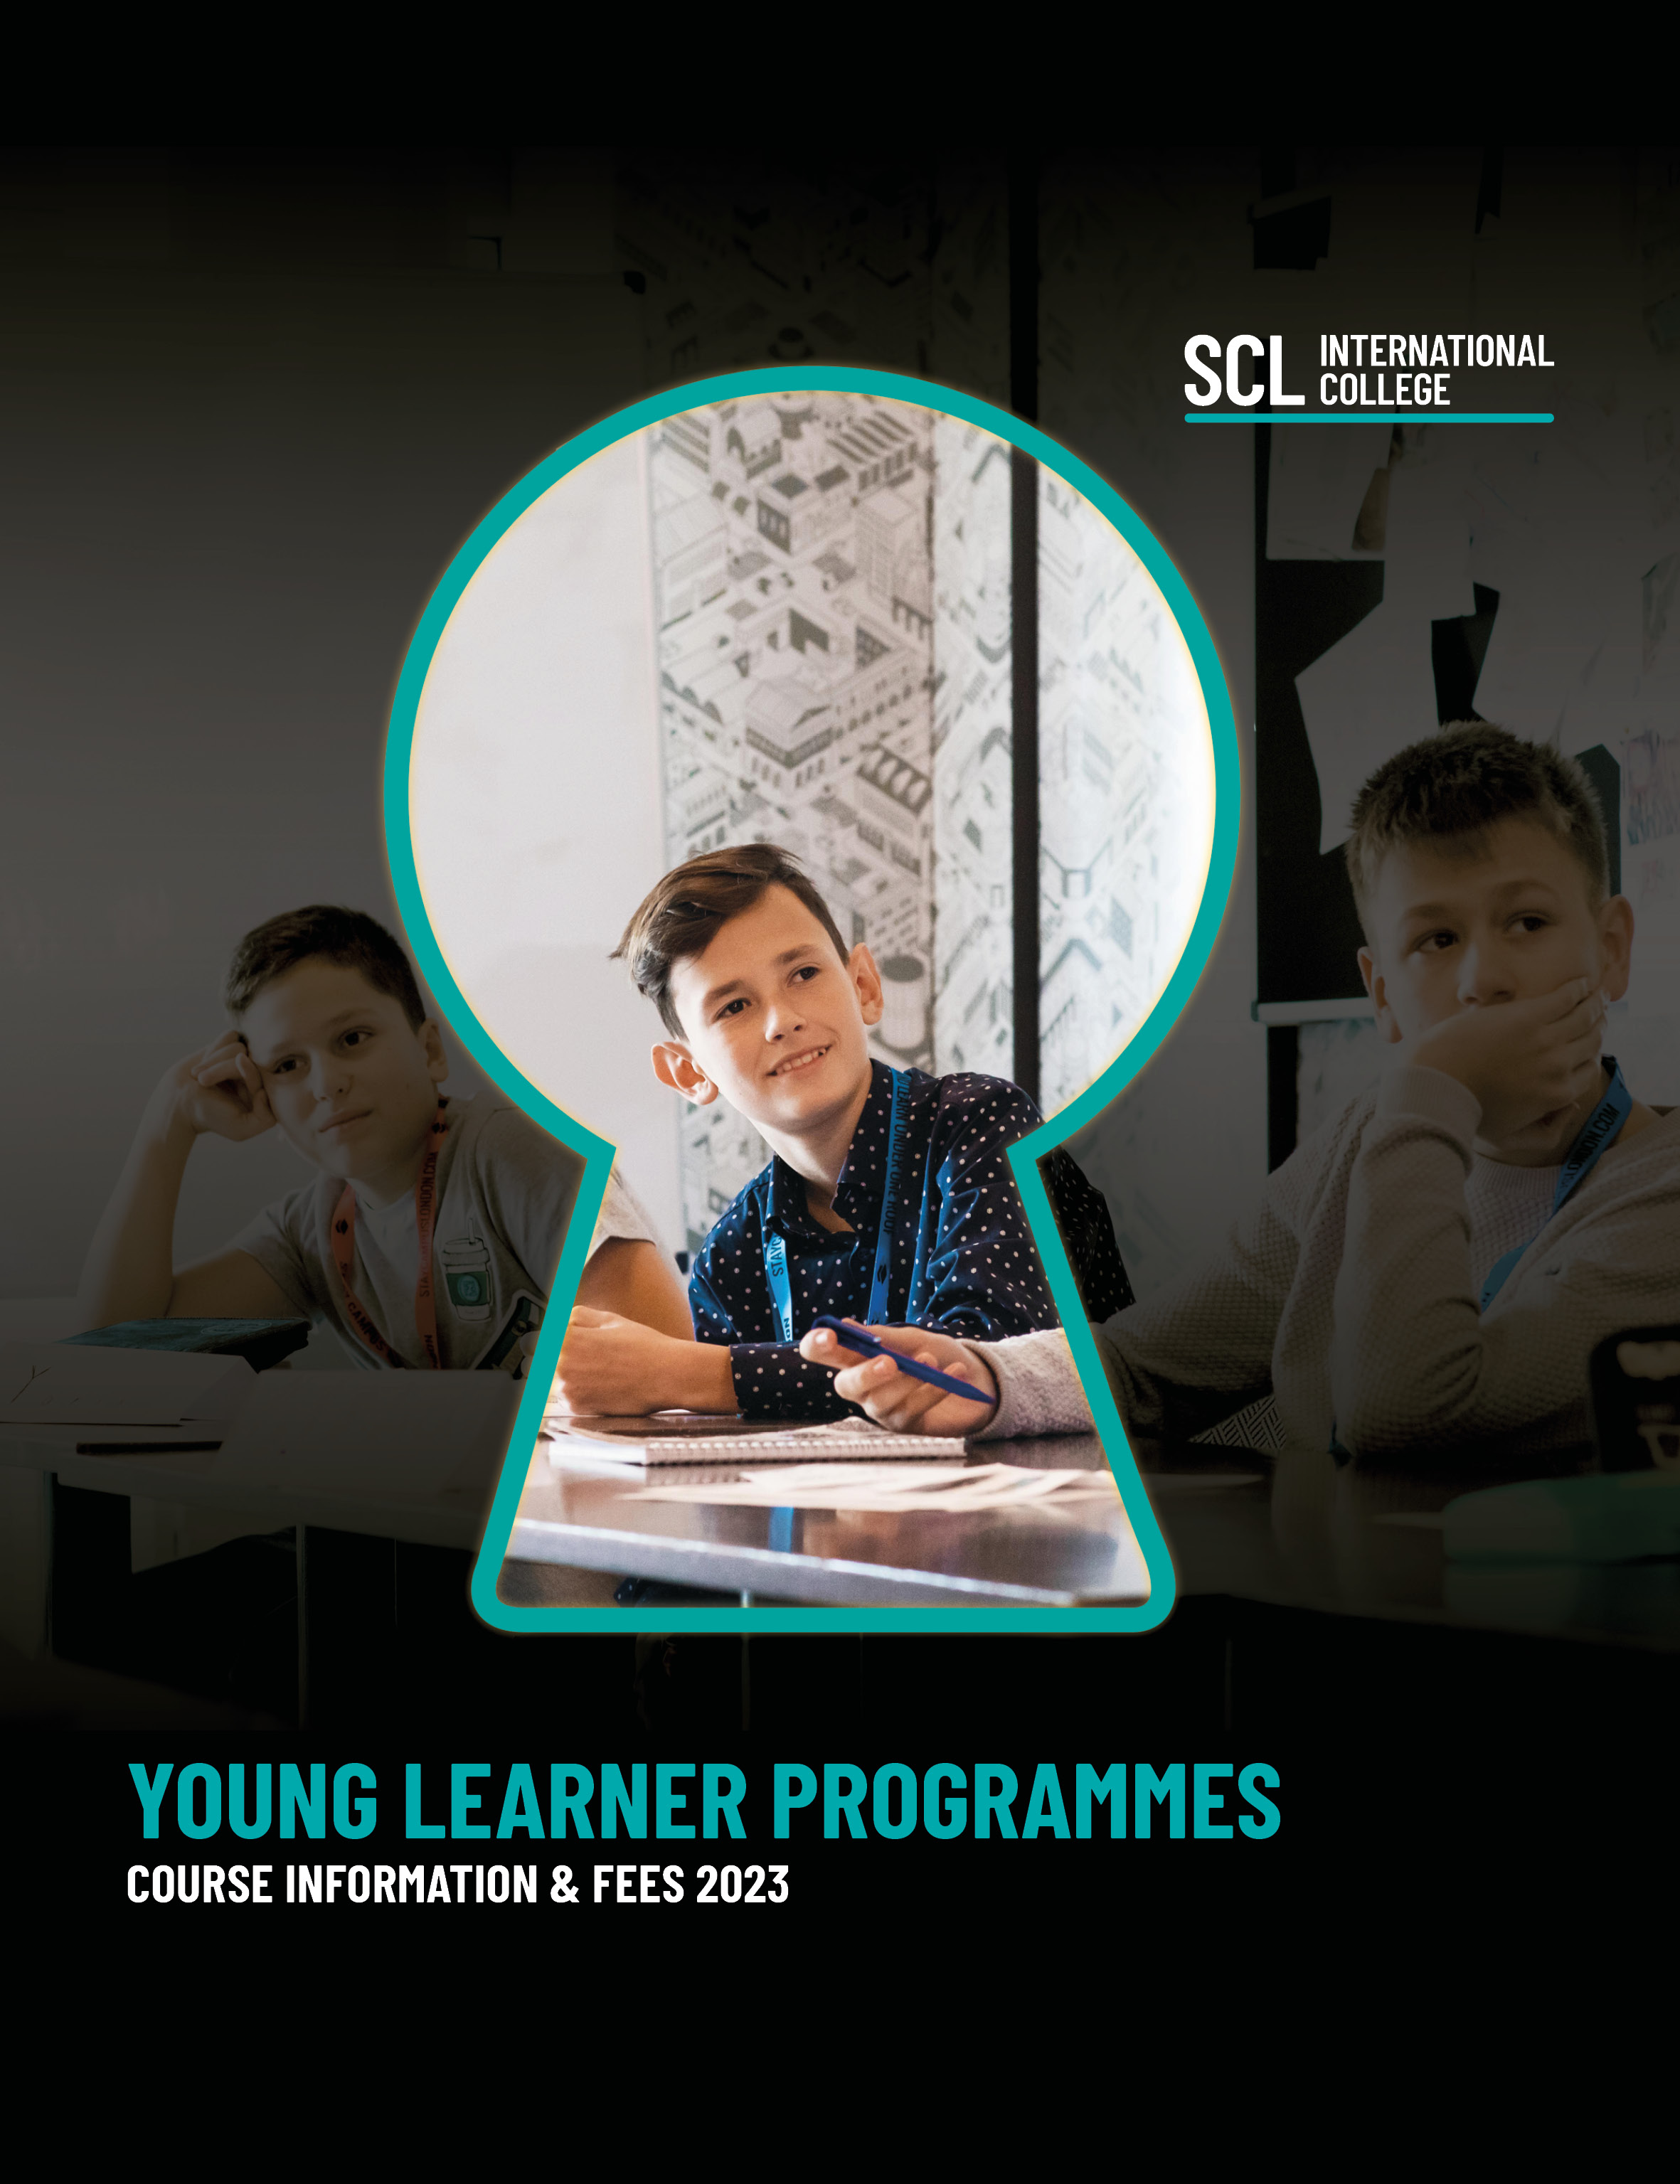 Young-Learner-Programmes-Brochure-Price-List-Cover-SCL-International-College